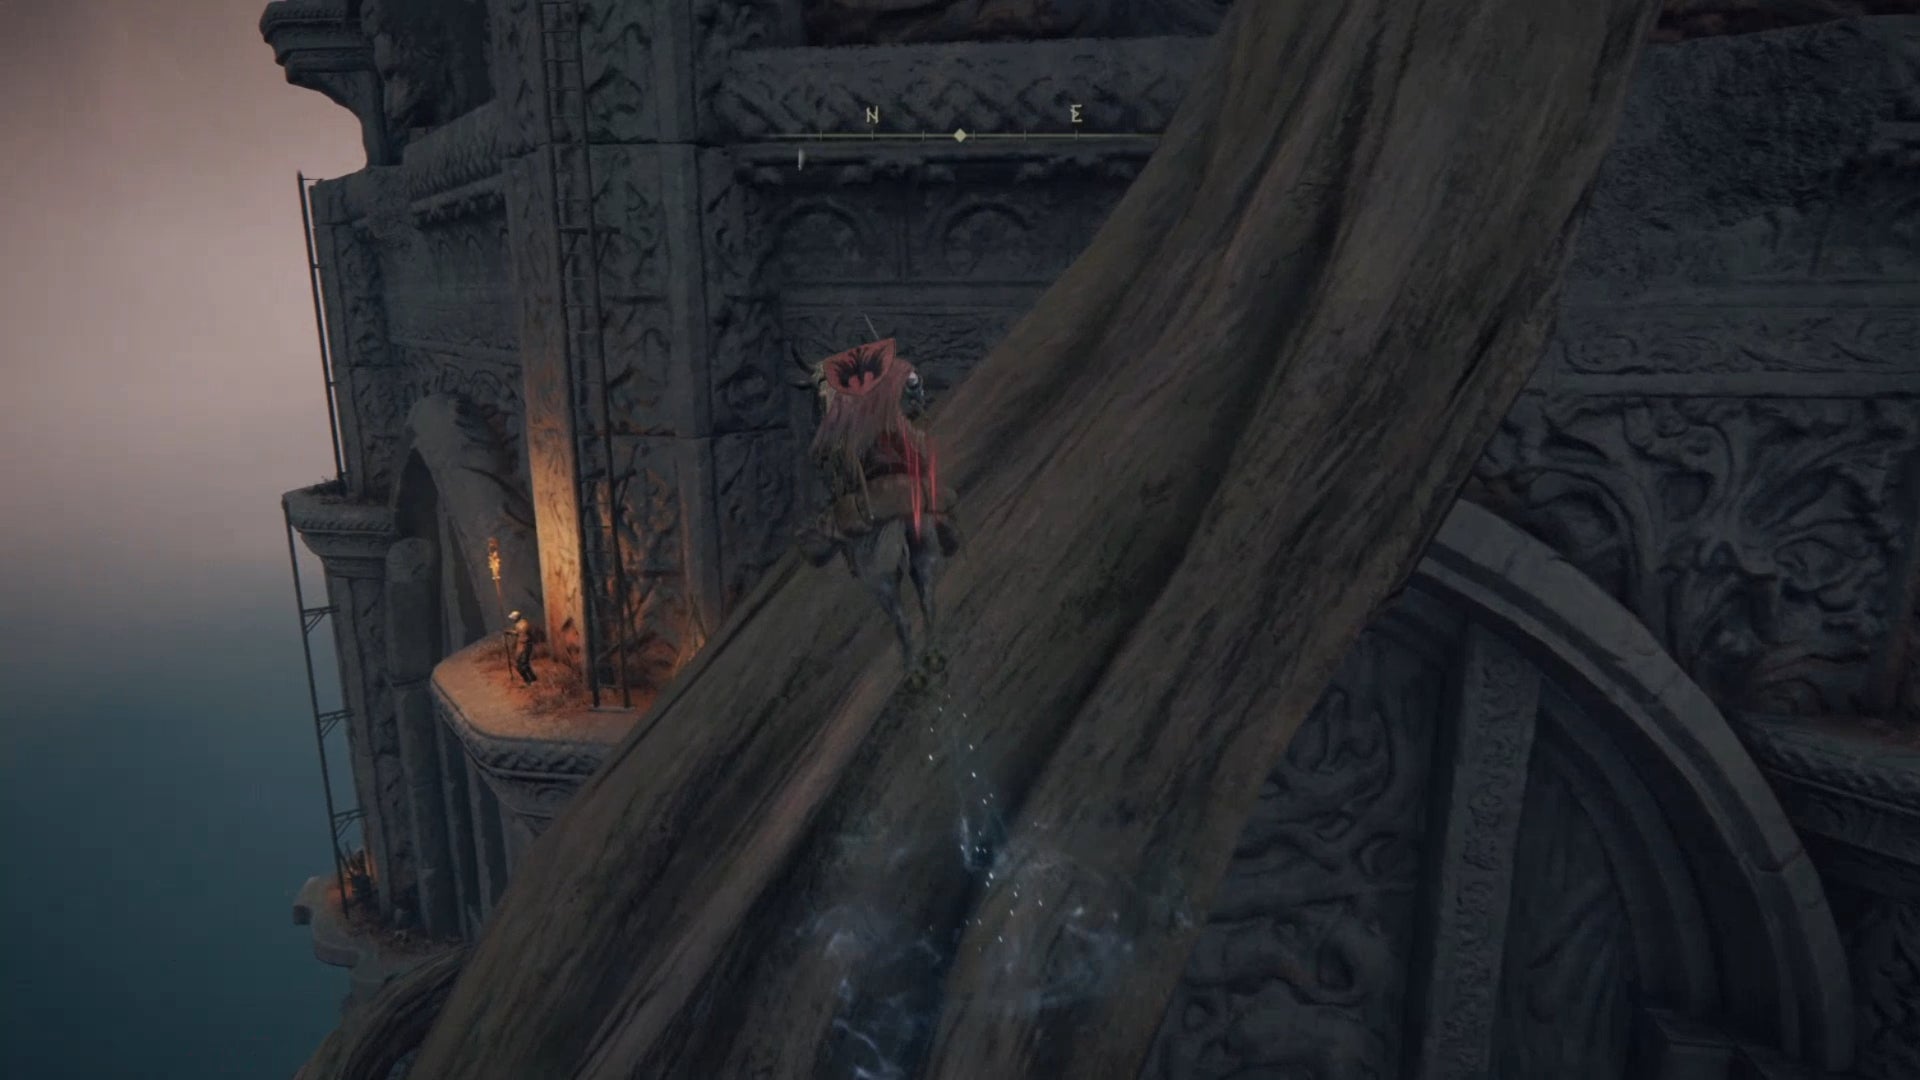 Elden Ring: the player uses the horse Torrent and a nearby branch to reach a ledge on the outside of the Divine Tower of Caelid.